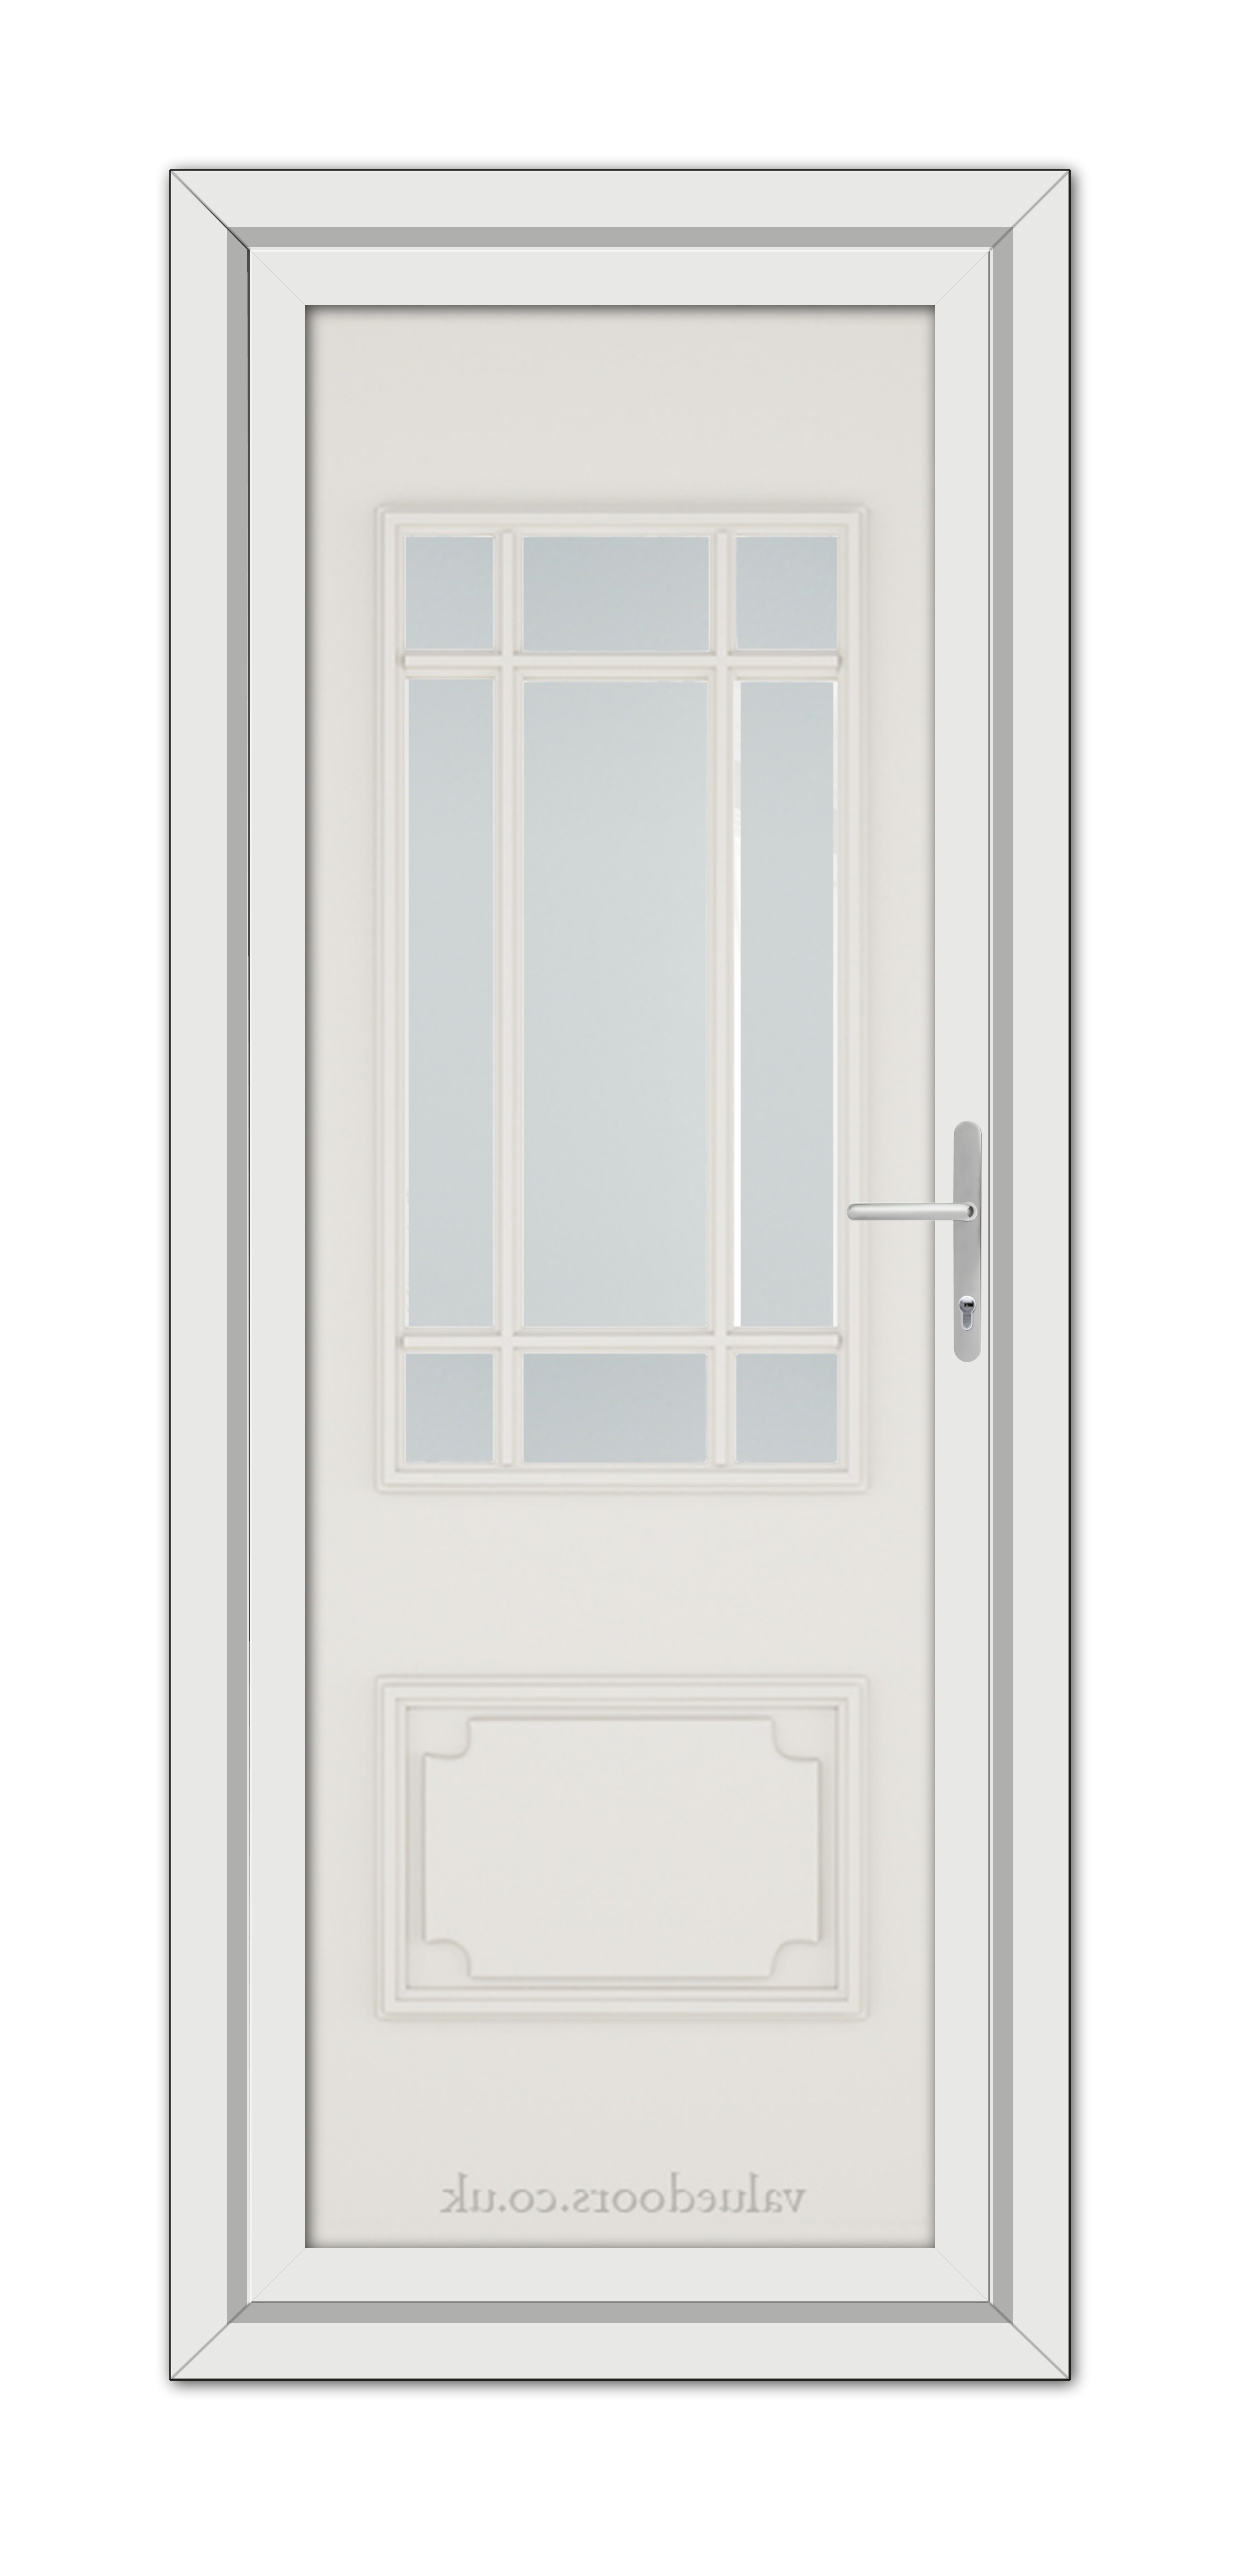 A White Cream Seville uPVC Door with glass panels.